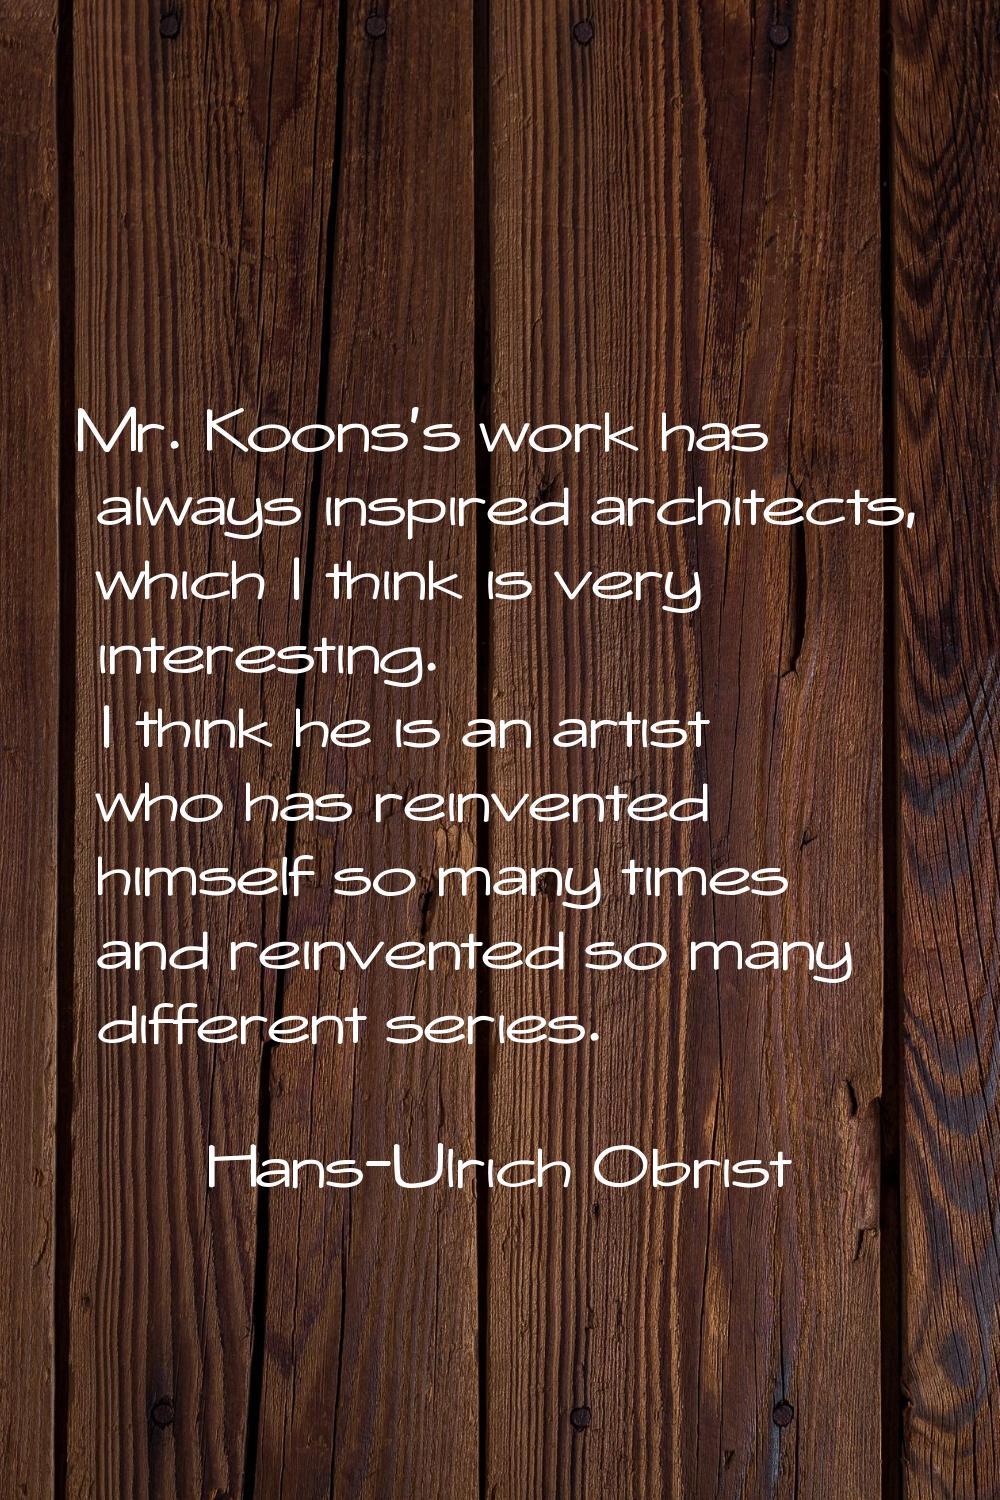 Mr. Koons's work has always inspired architects, which I think is very interesting. I think he is a